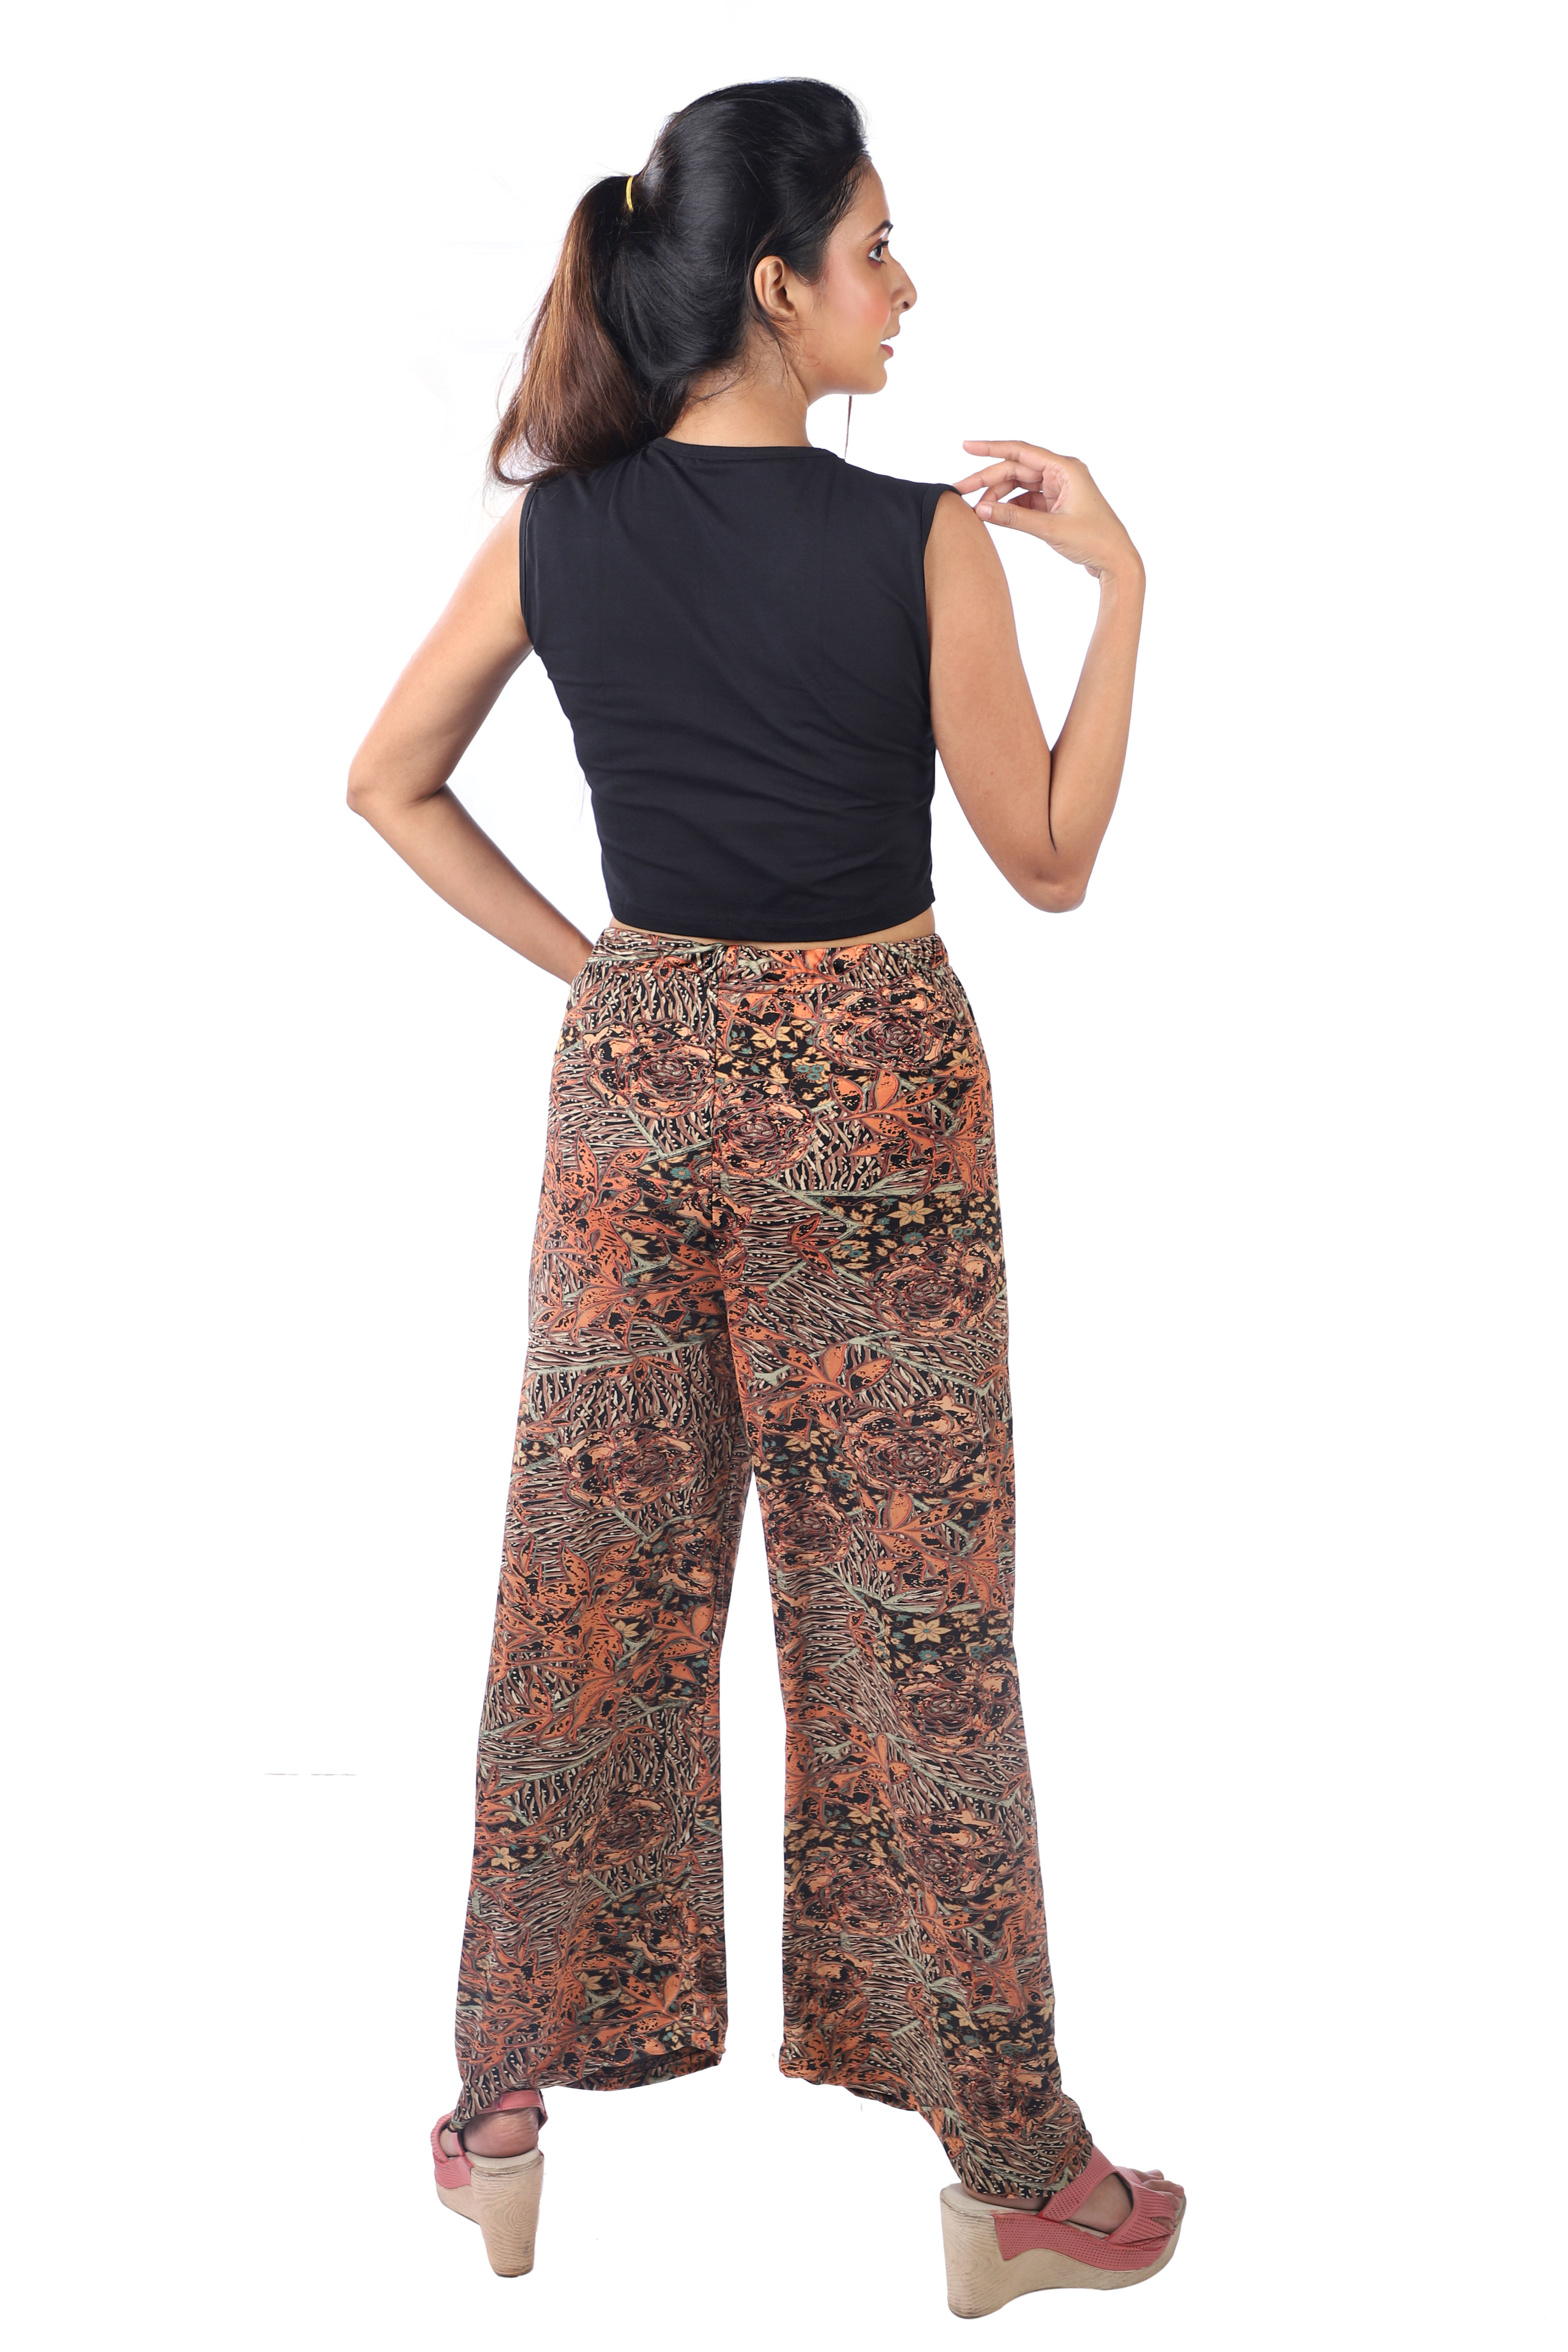 14 Palazzo Pants Outfit For Work  The Finest Feed  Fashion Outfits Work  outfit